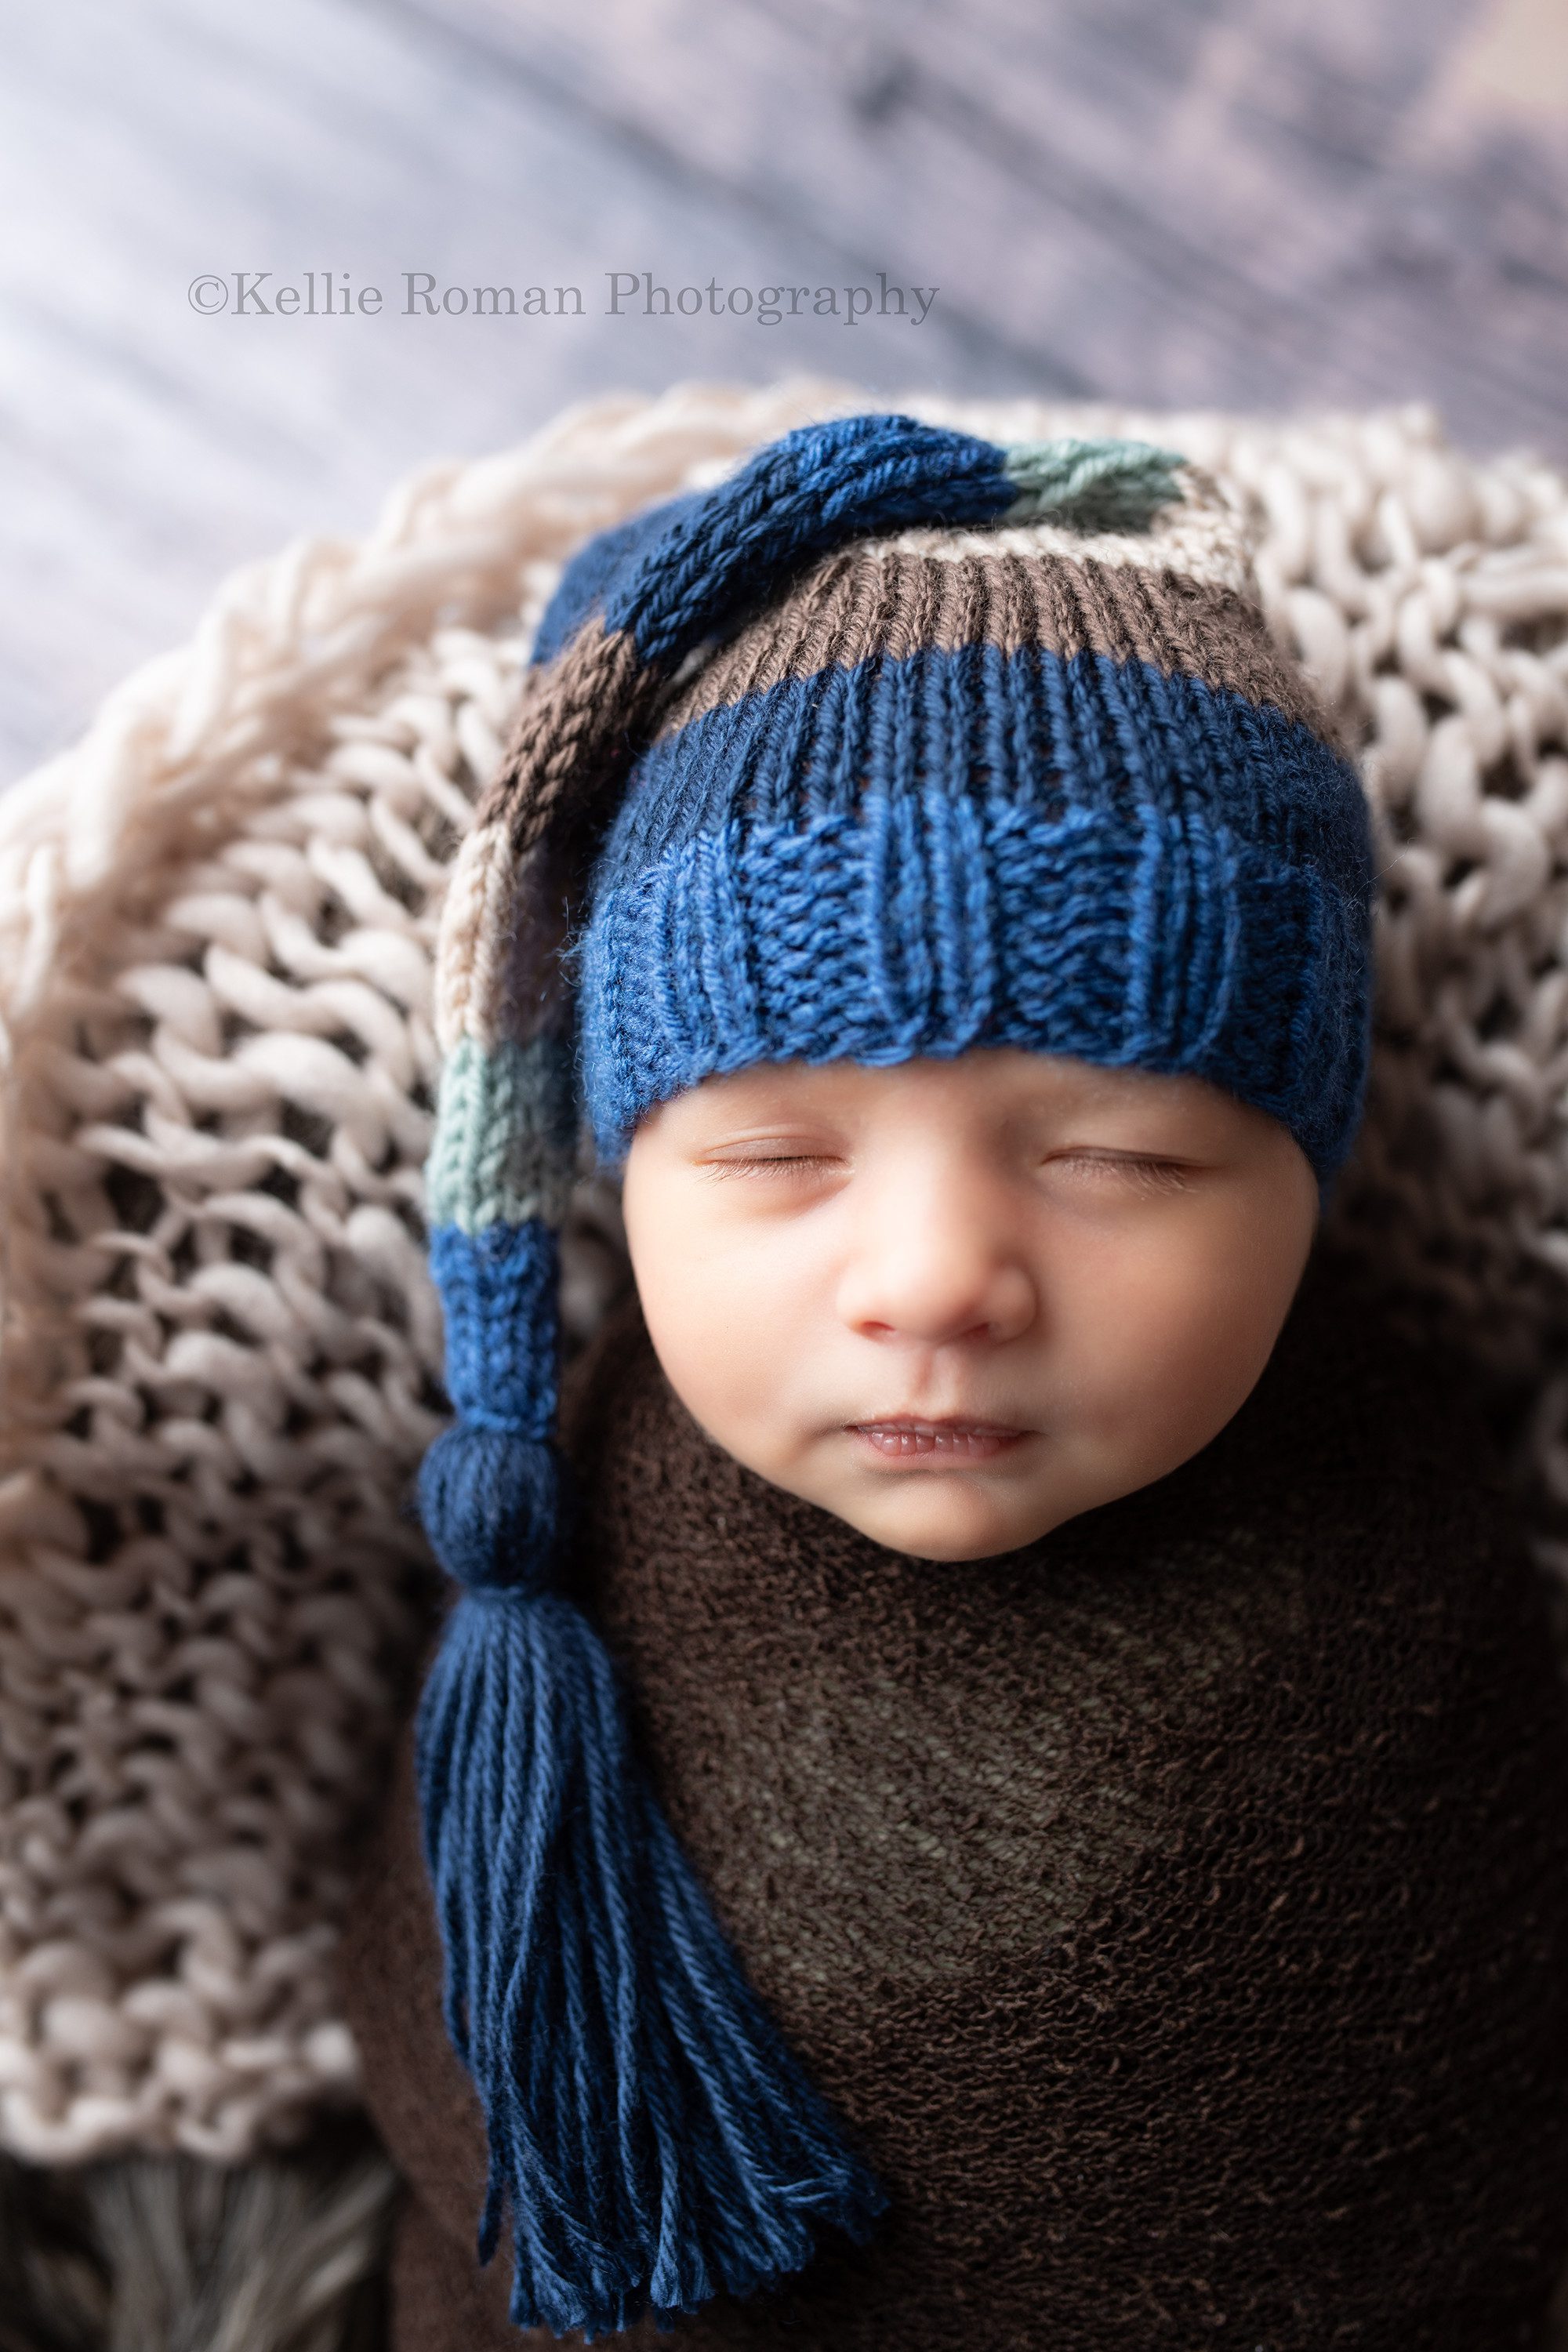 studio newborn session a baby boy is sleeping in a milwaukee photographer studio he is swaddled in a brown fabric while laying in a crate with tan and brown blankets and wraps. He's wearing a striped knit hat with shades of blue ran and brown